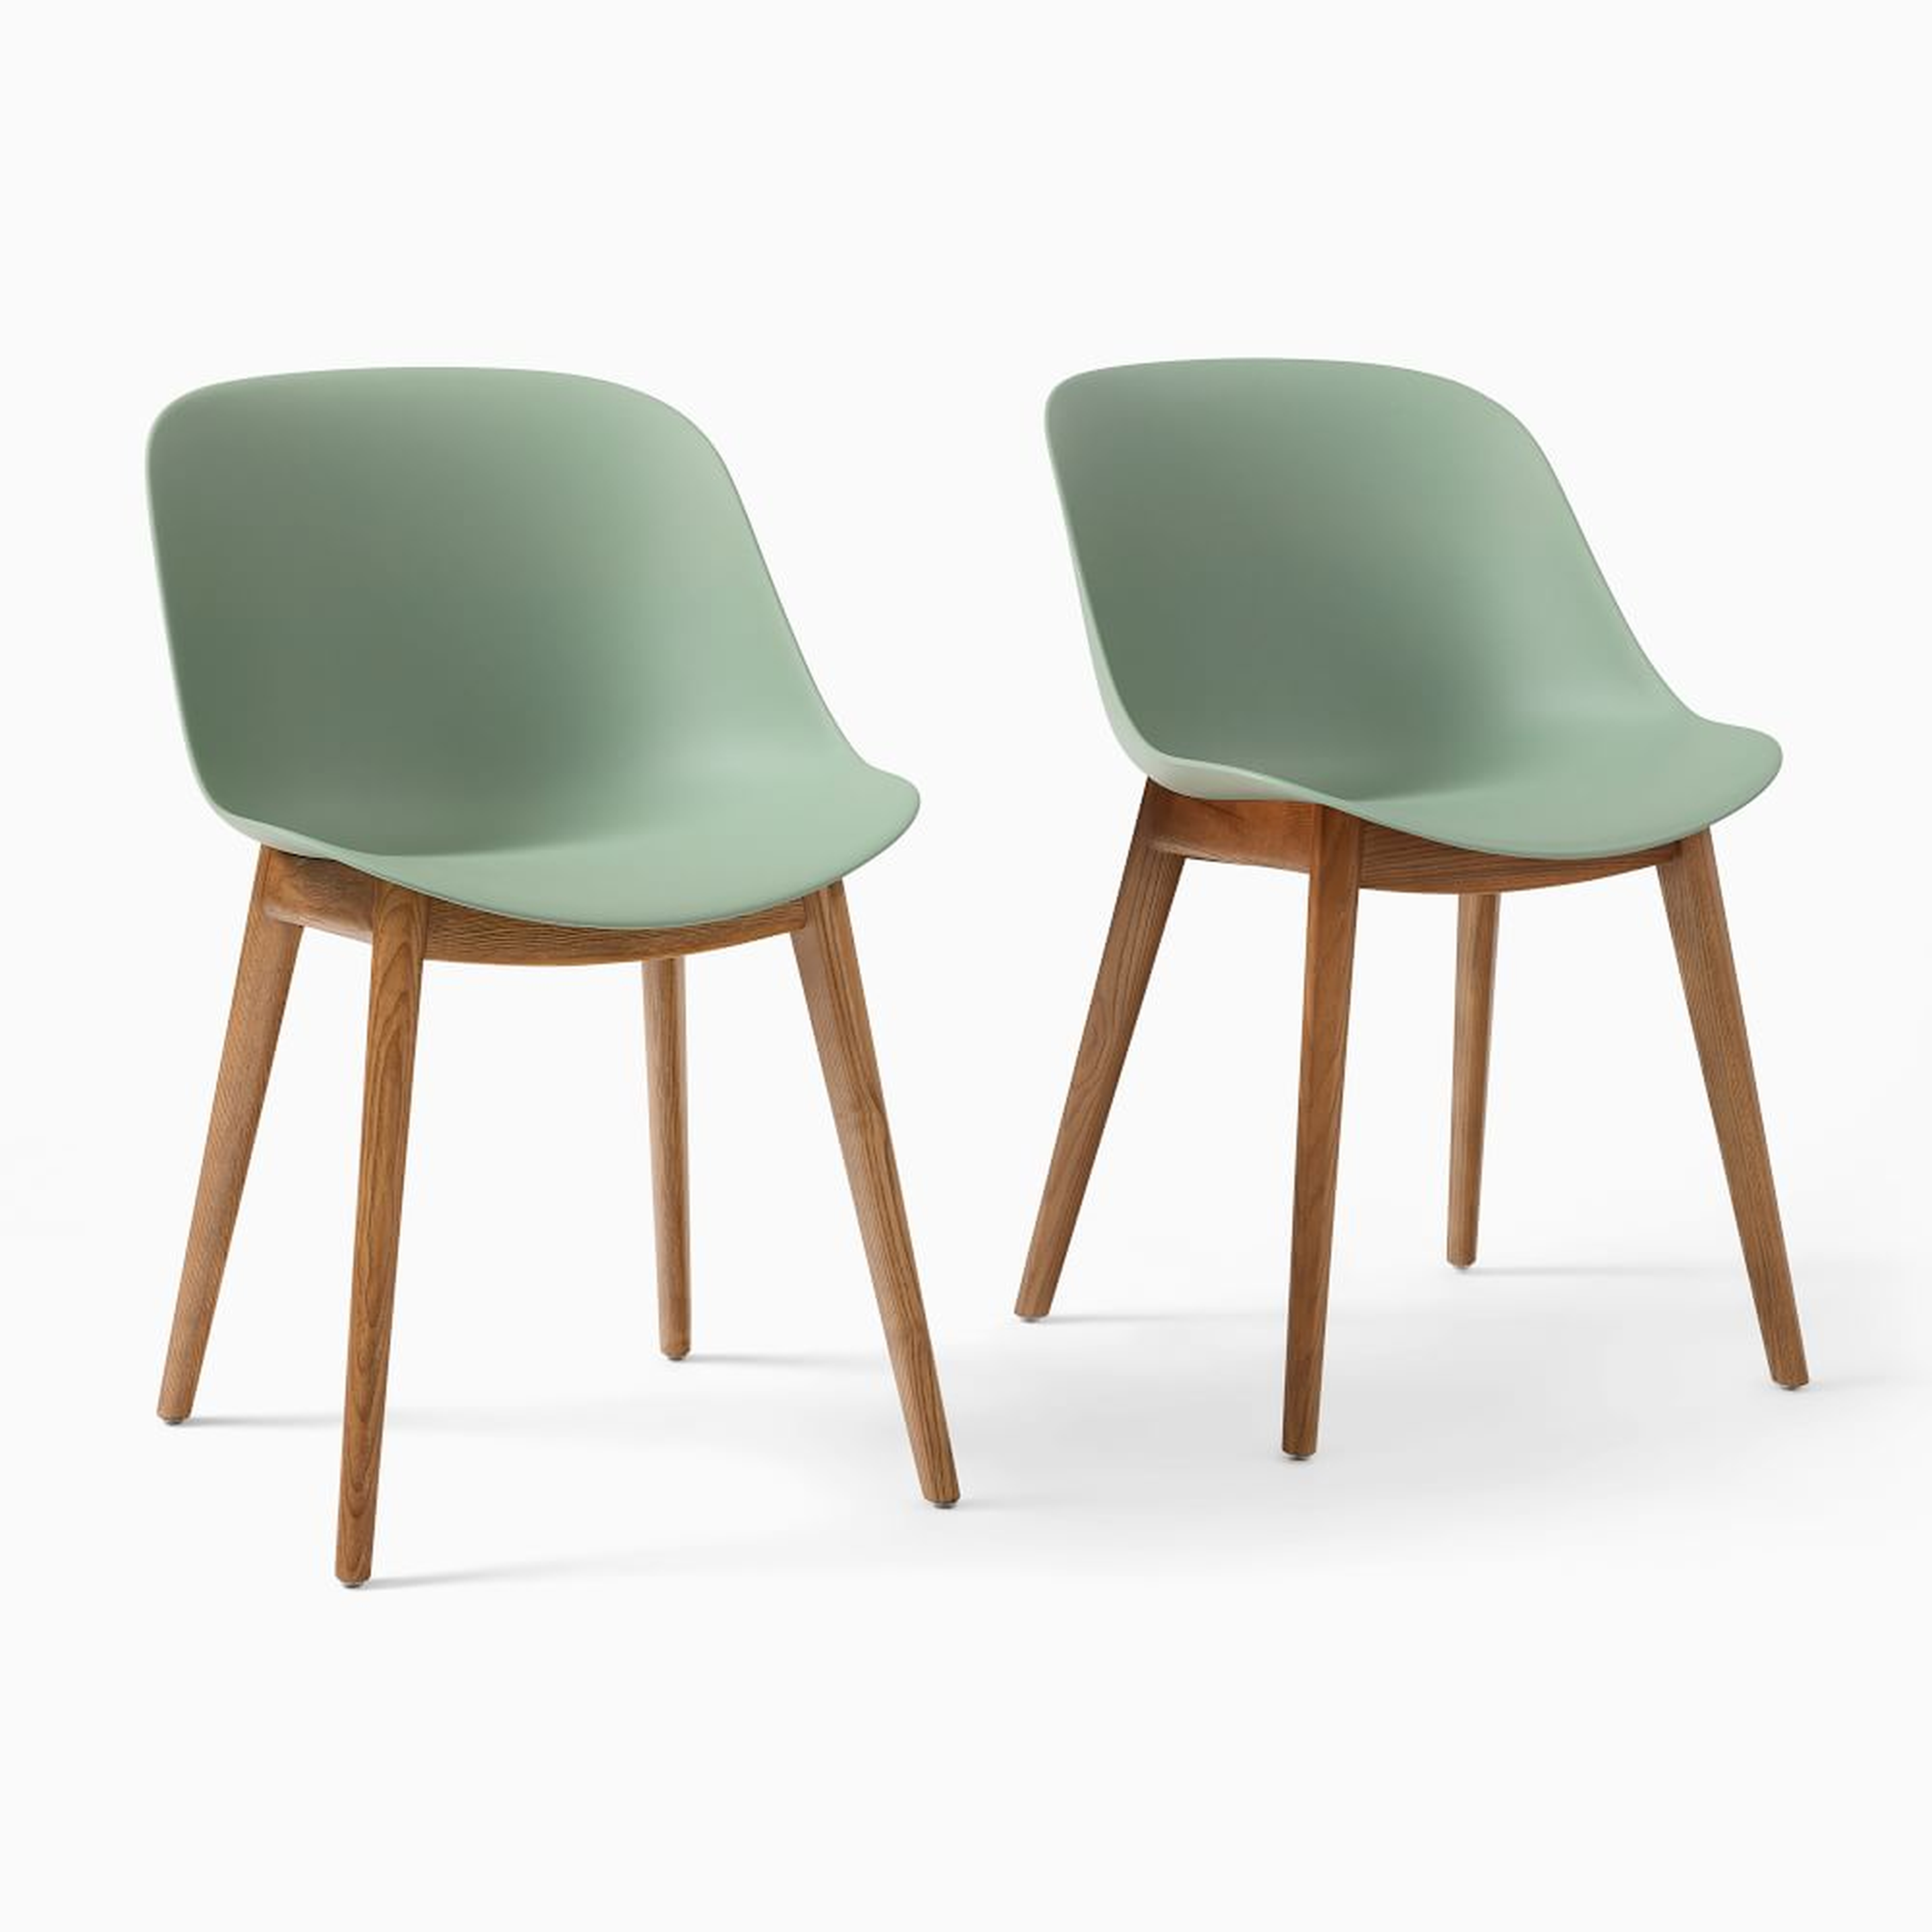 Classon Recycled Shell Chair, Set of 2, Celadon, Cool Walnut Wood - West Elm